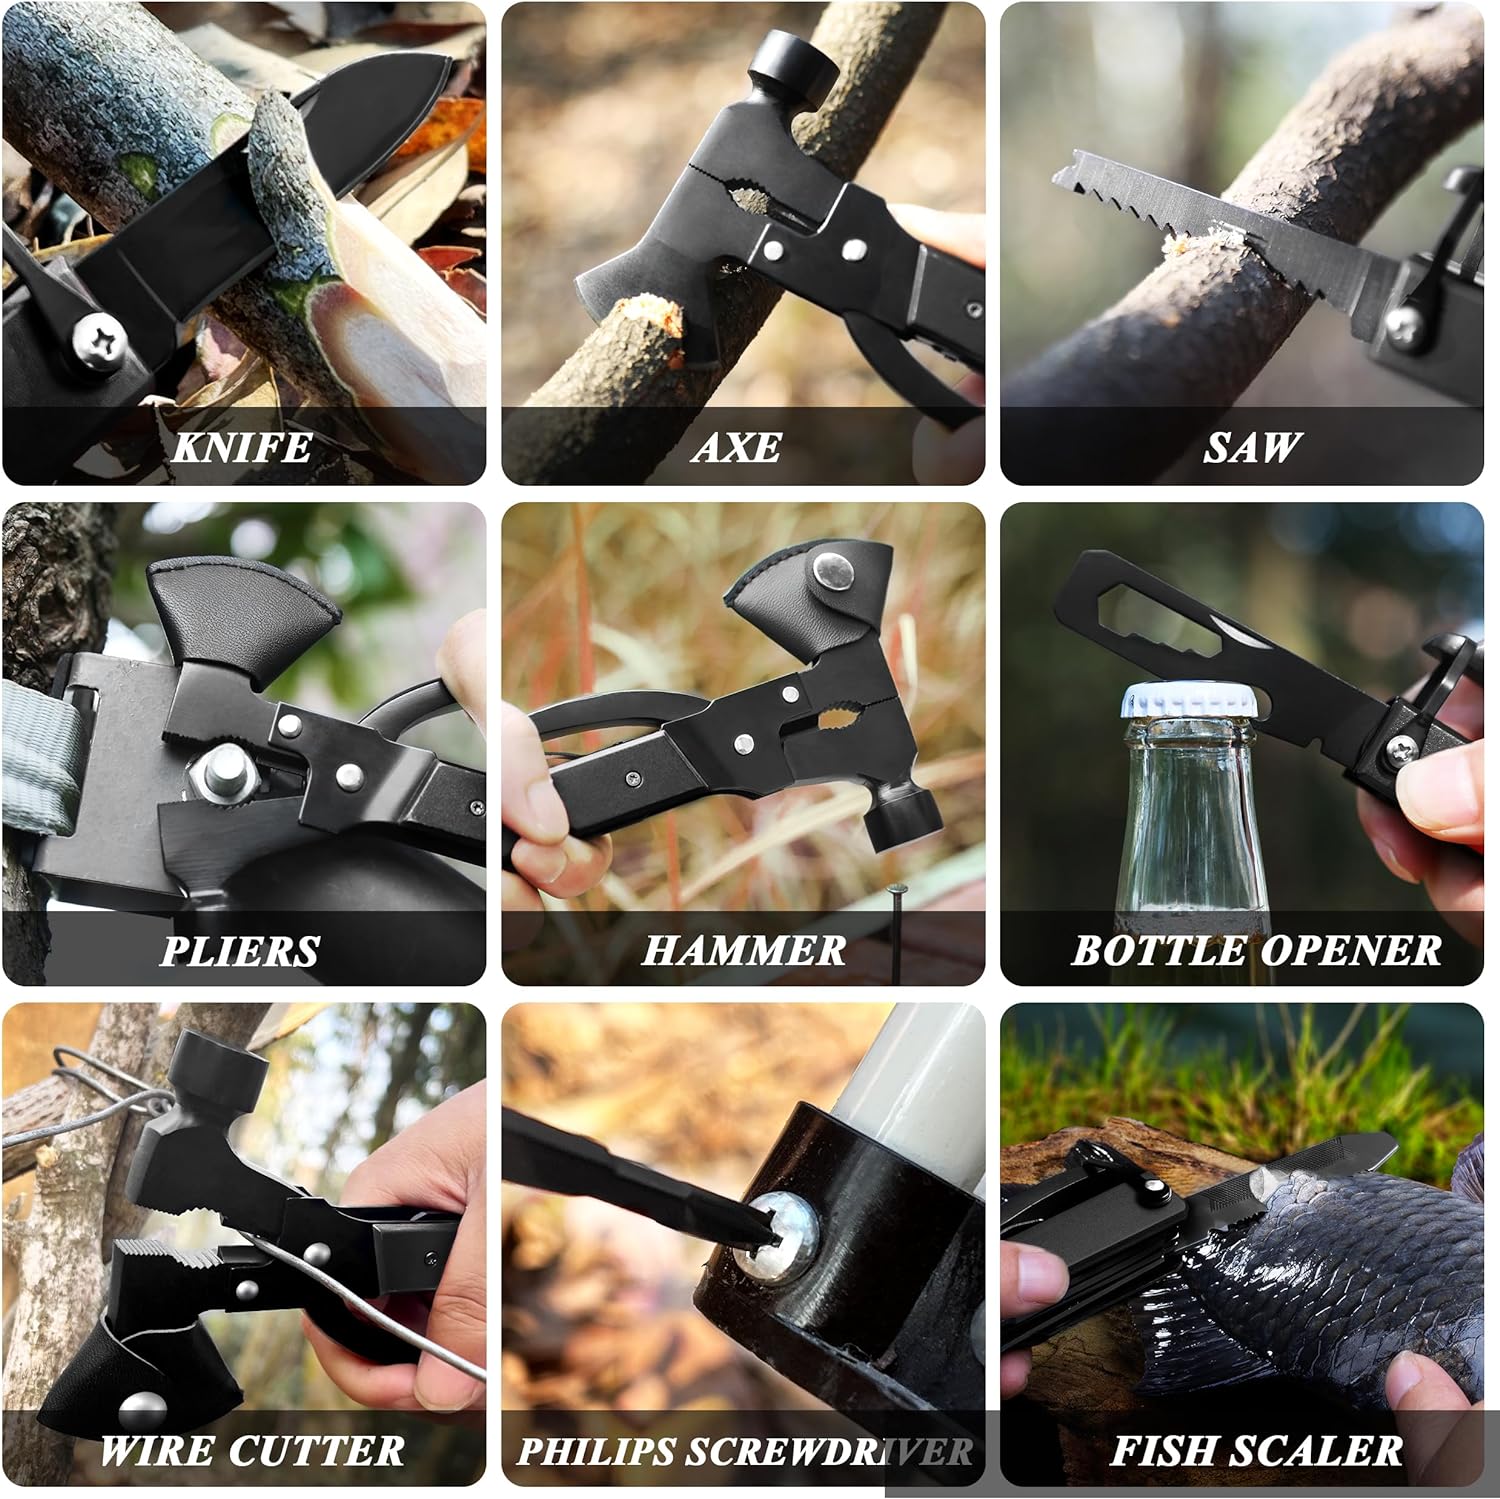 RoverTac Multitool Axe Camping Survival Gear Christmas Gifts for Men Dad Him 14-in-1 Multi Tool Knife Hammer Pliers Saw Screwdrivers Bottle Can Opener Nylon Sheath Perfect for Camping Hiking Survival